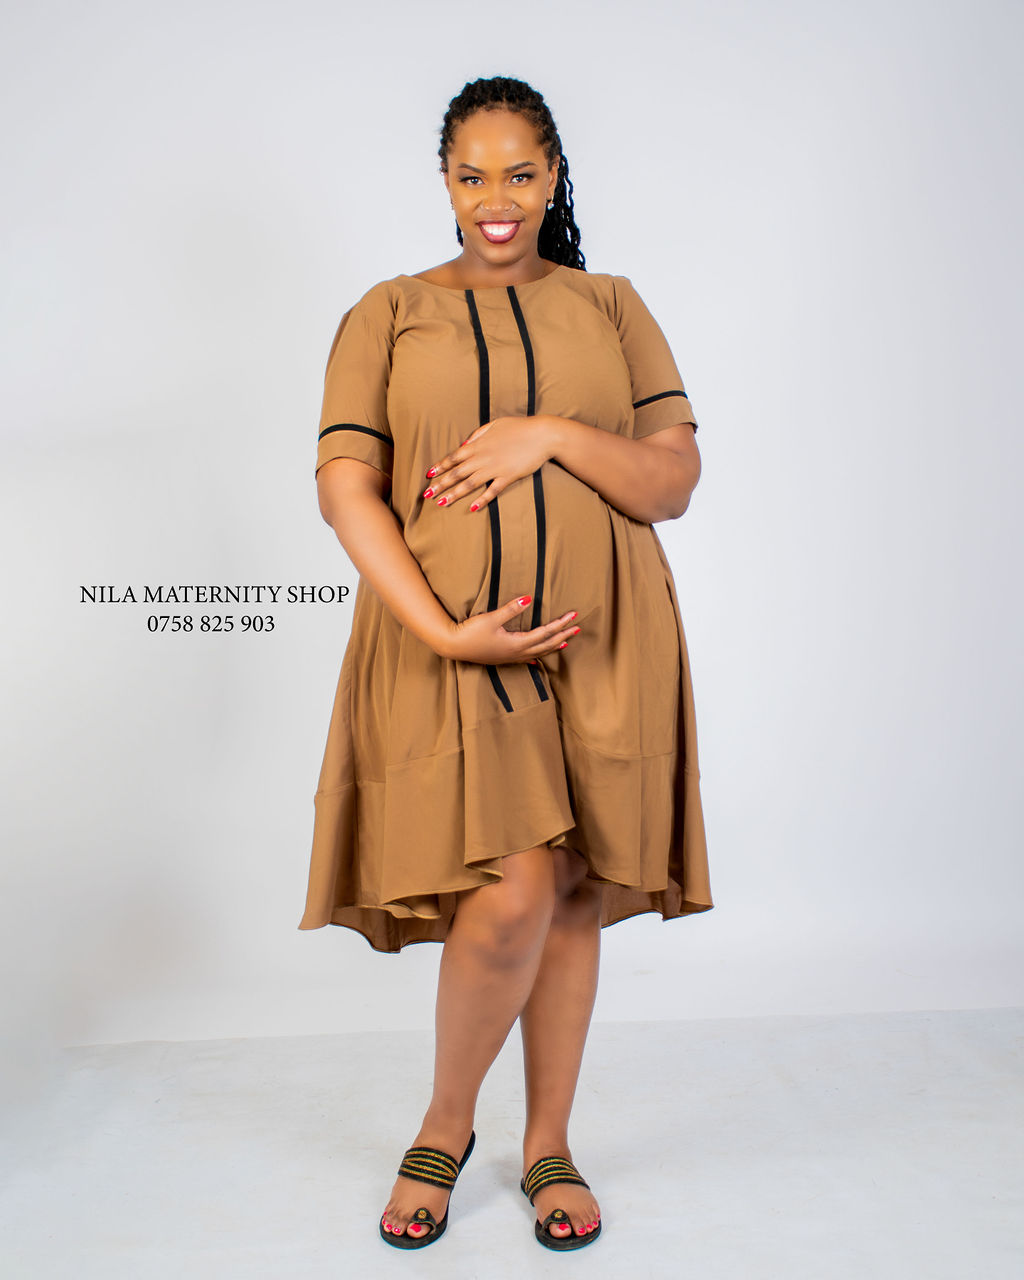 Free Size Ladies Official Dress Pregnant Friendly